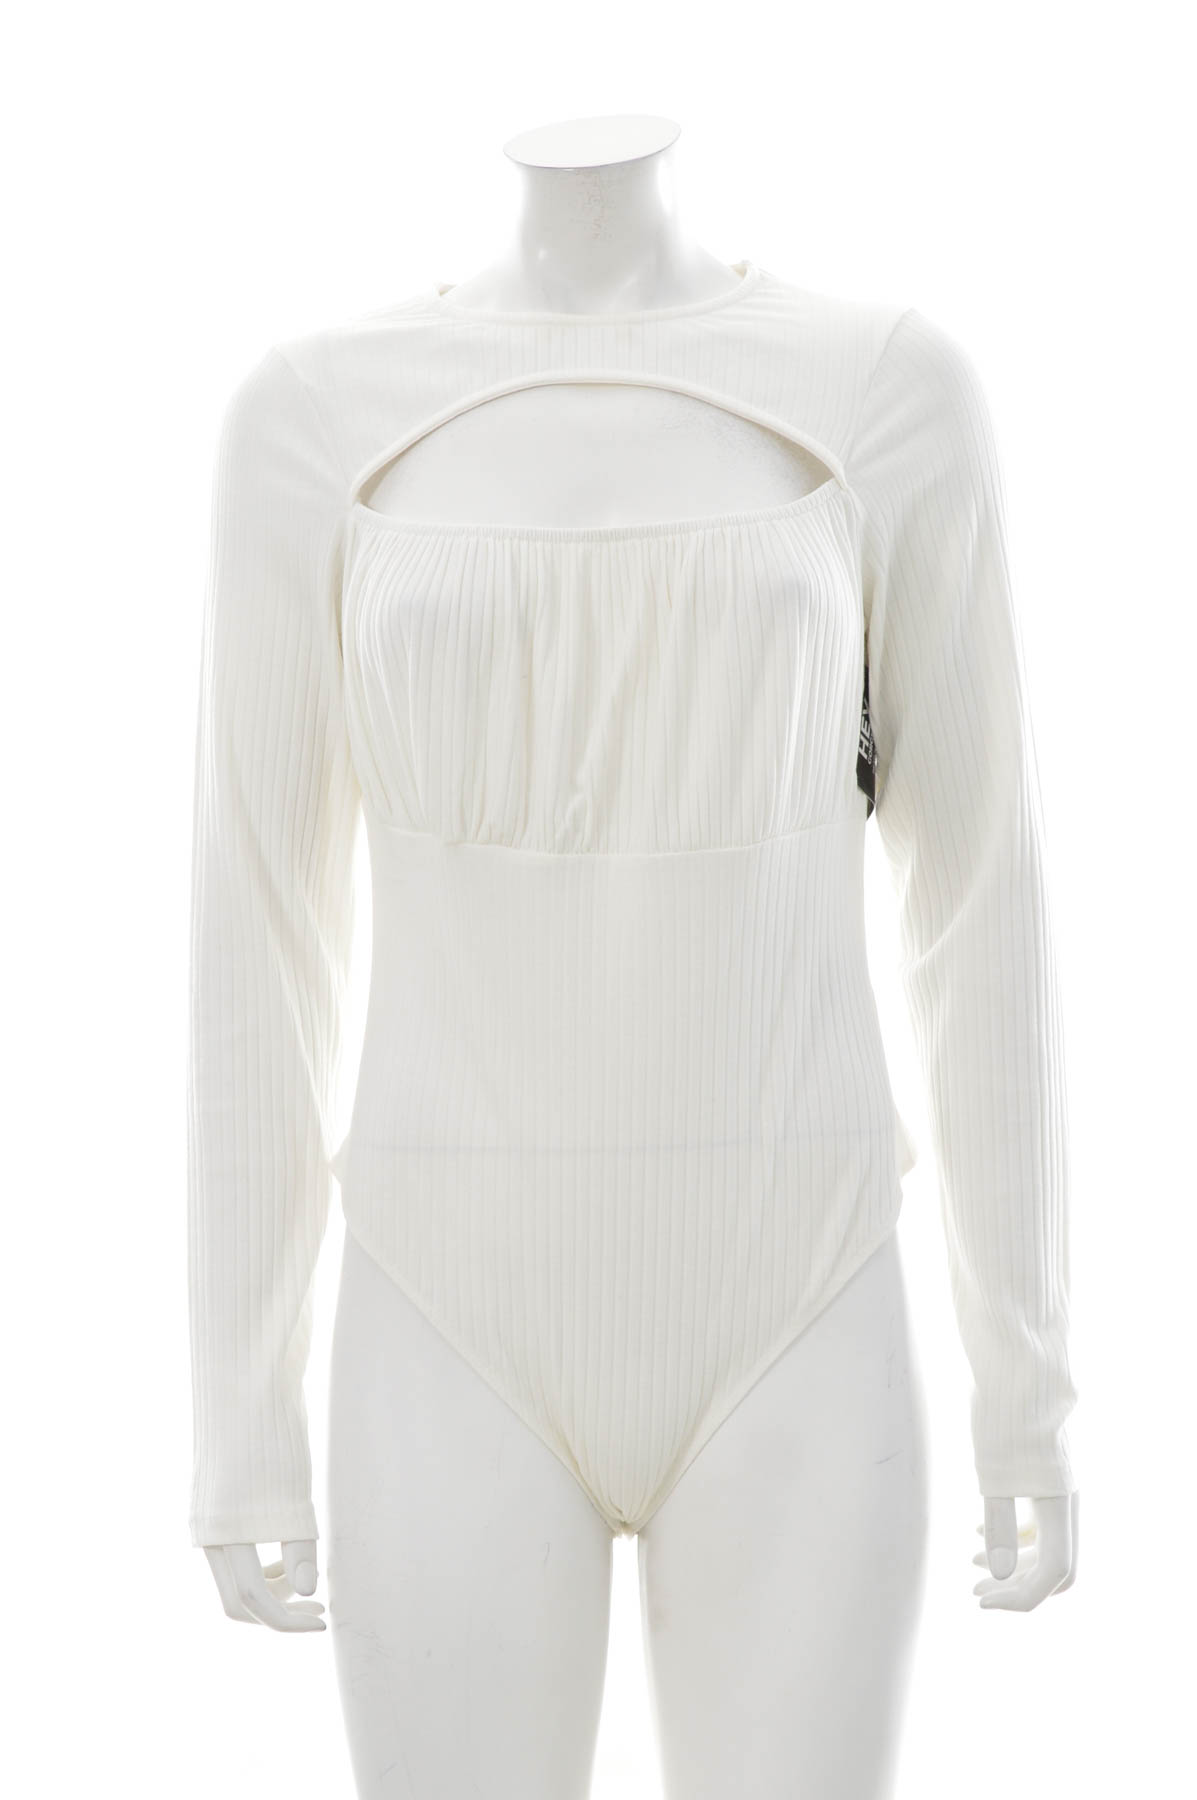 Woman's bodysuit - NLY Trend - 0